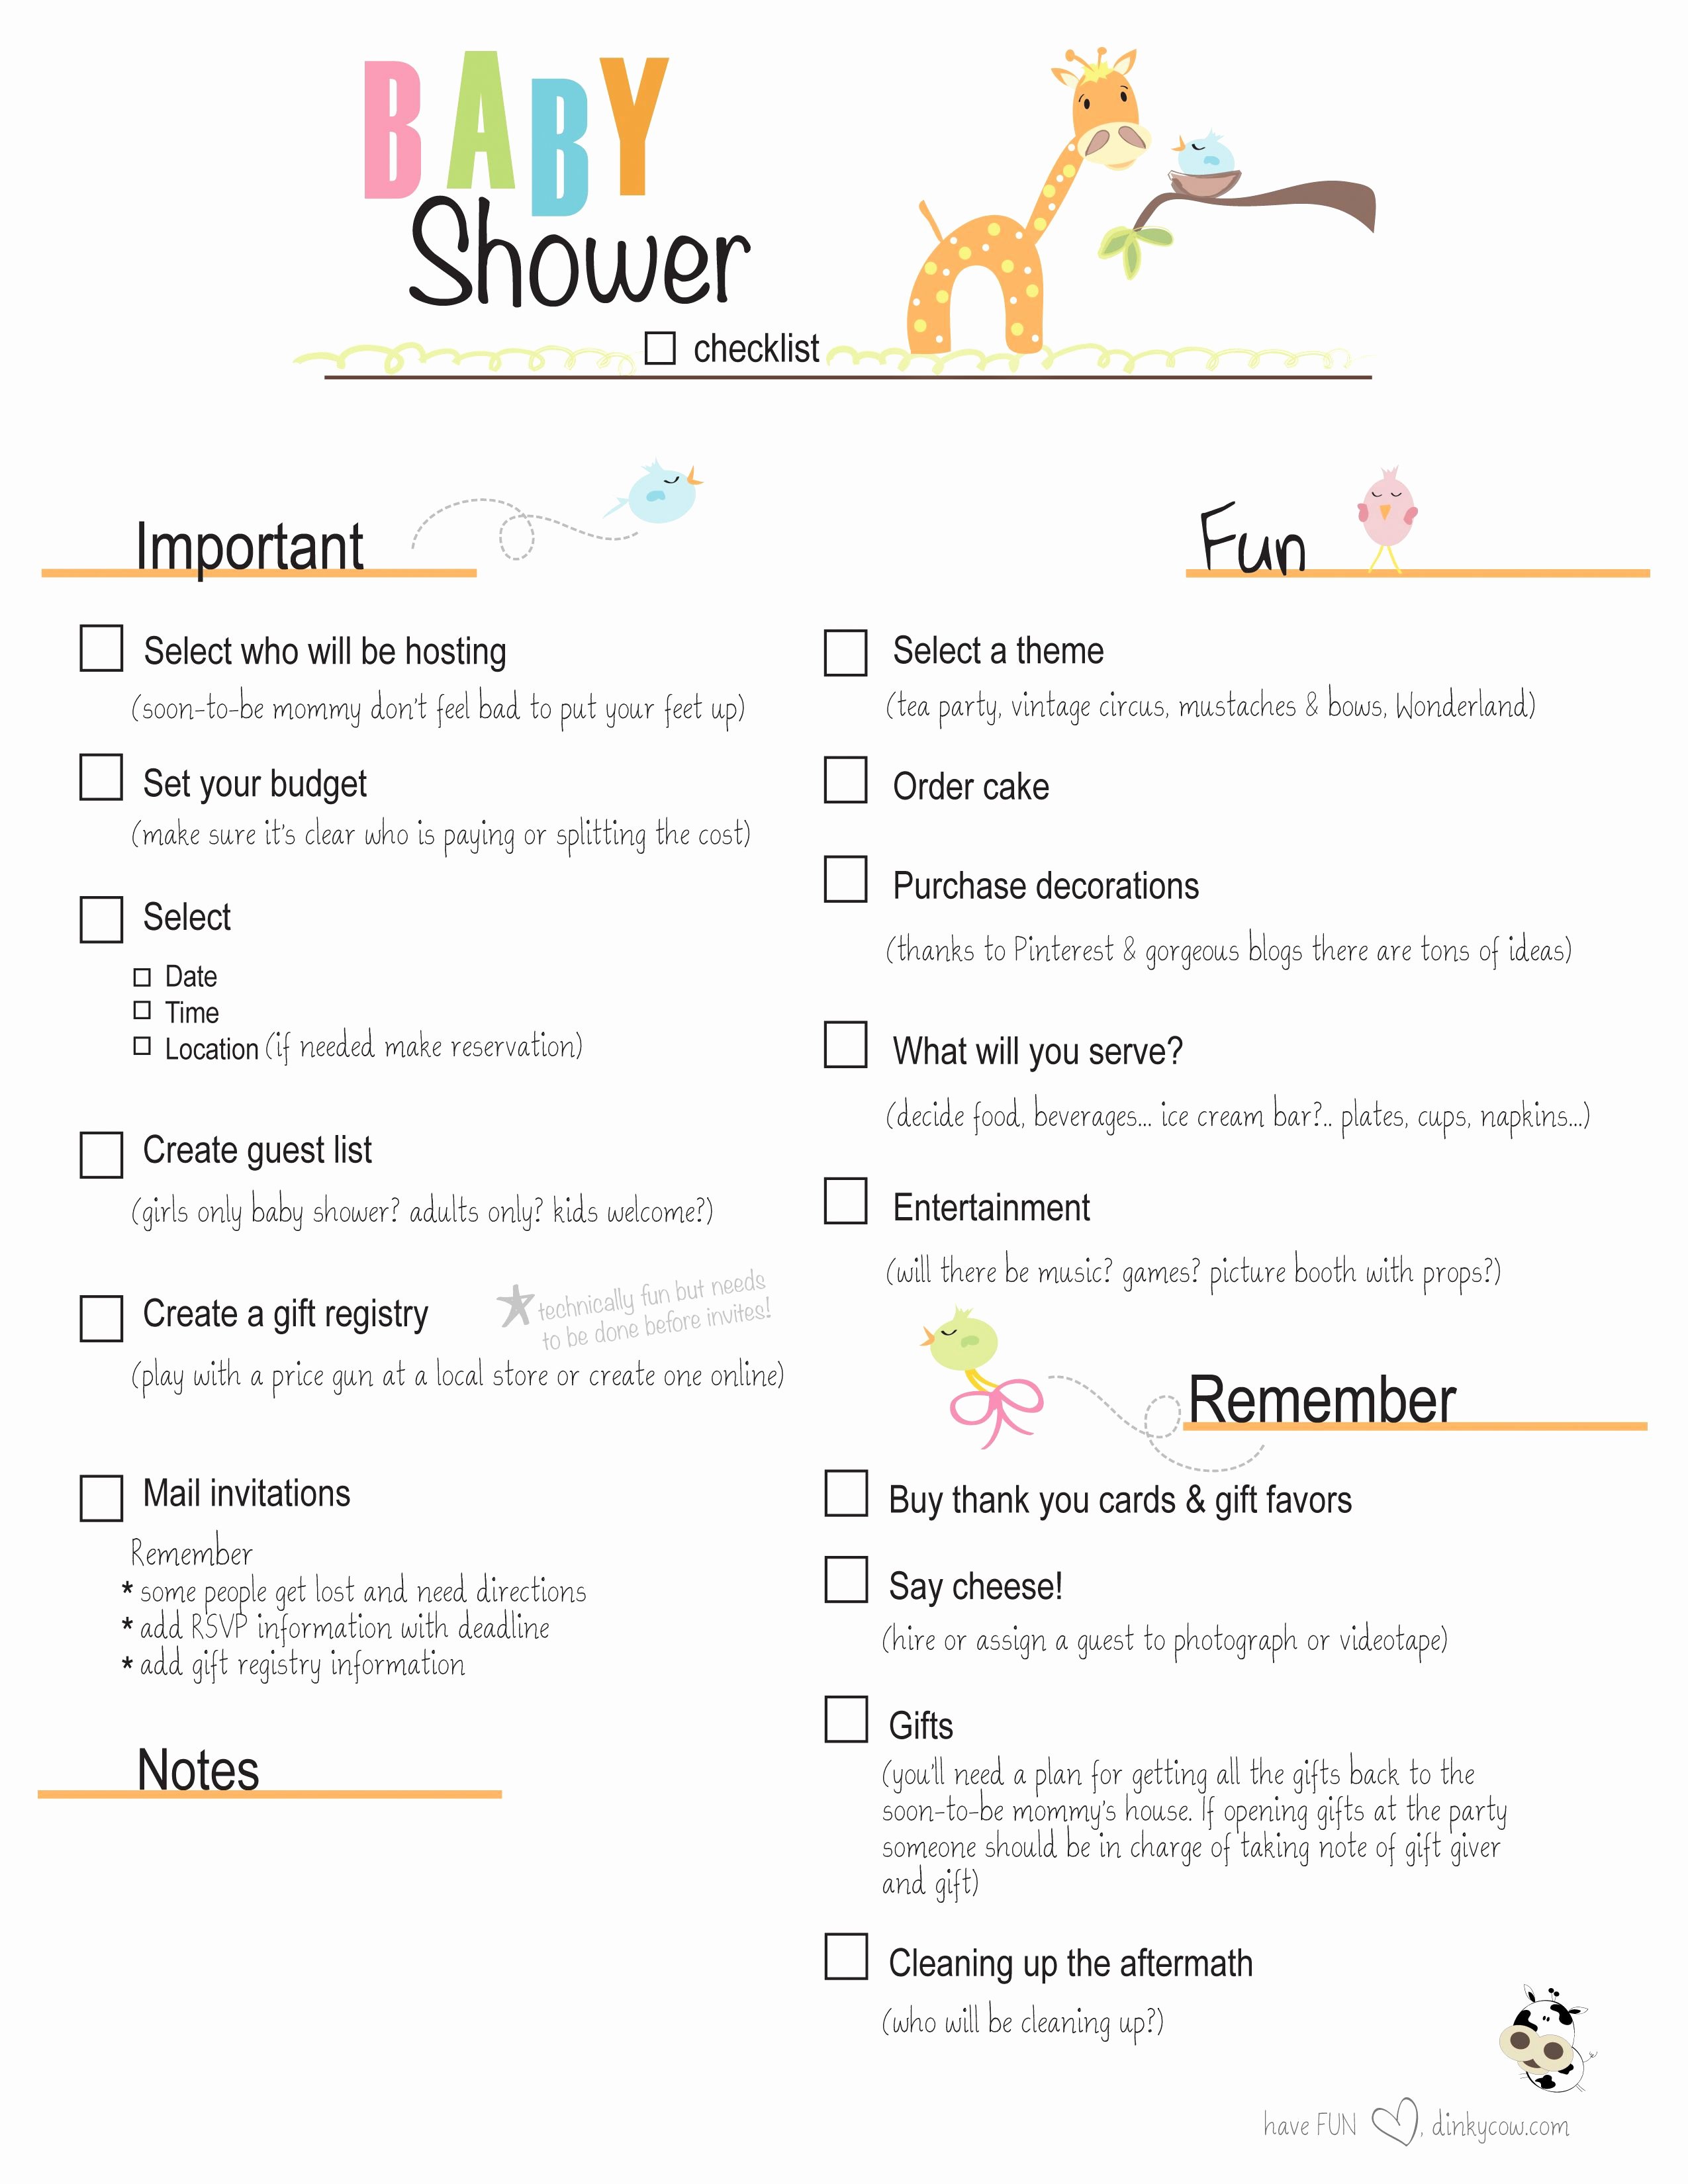 Baby Shower Checklist Template Lovely Free Printable Baby Shower Checklist